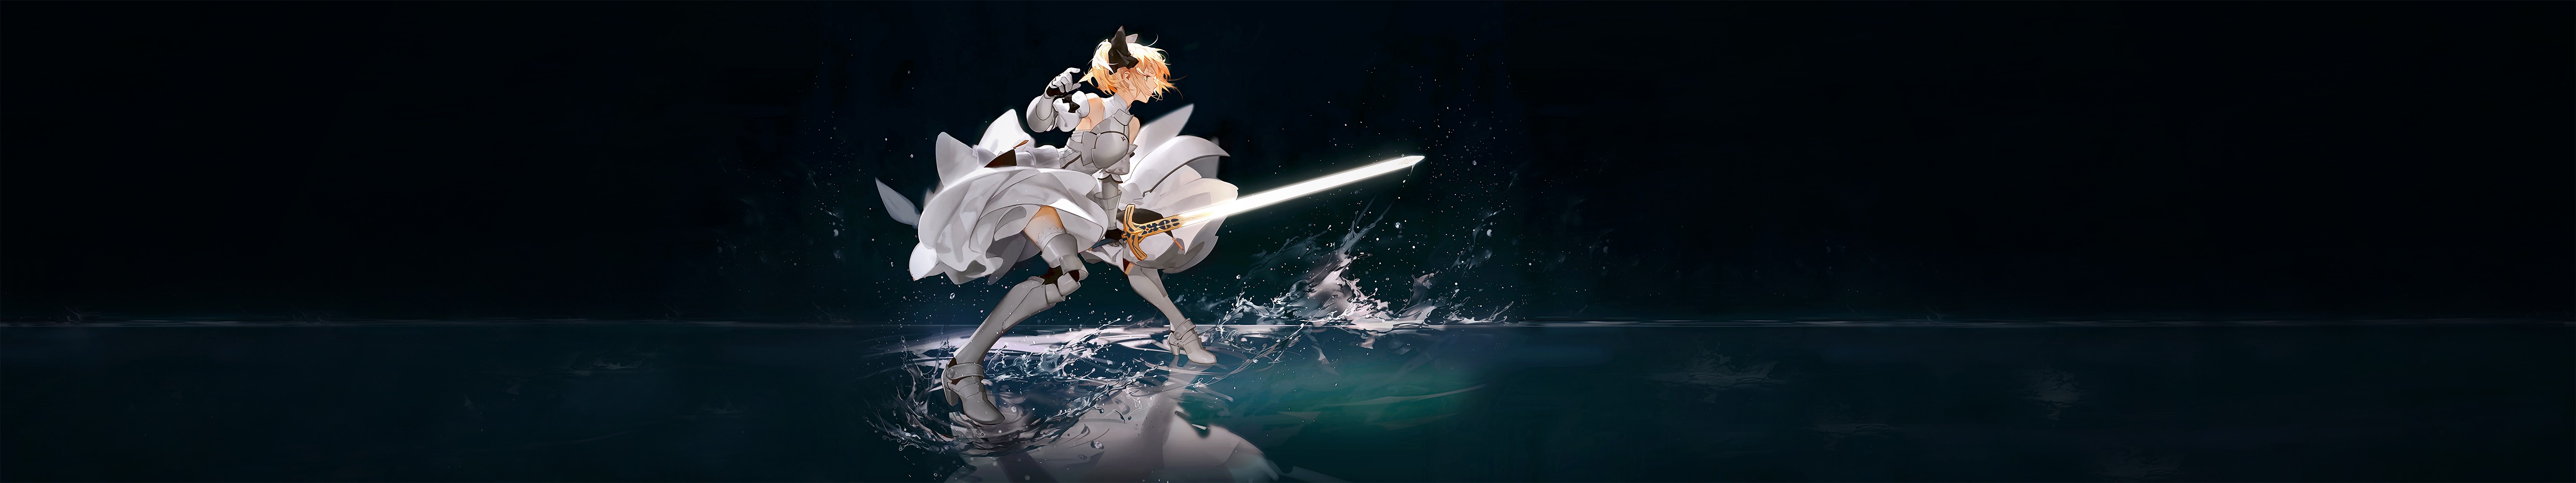 Anime 5760x1080 Saber anime girls anime fantasy girl sword water blonde Fate series Fate/Extra Saber Lily women with swords Pixiv